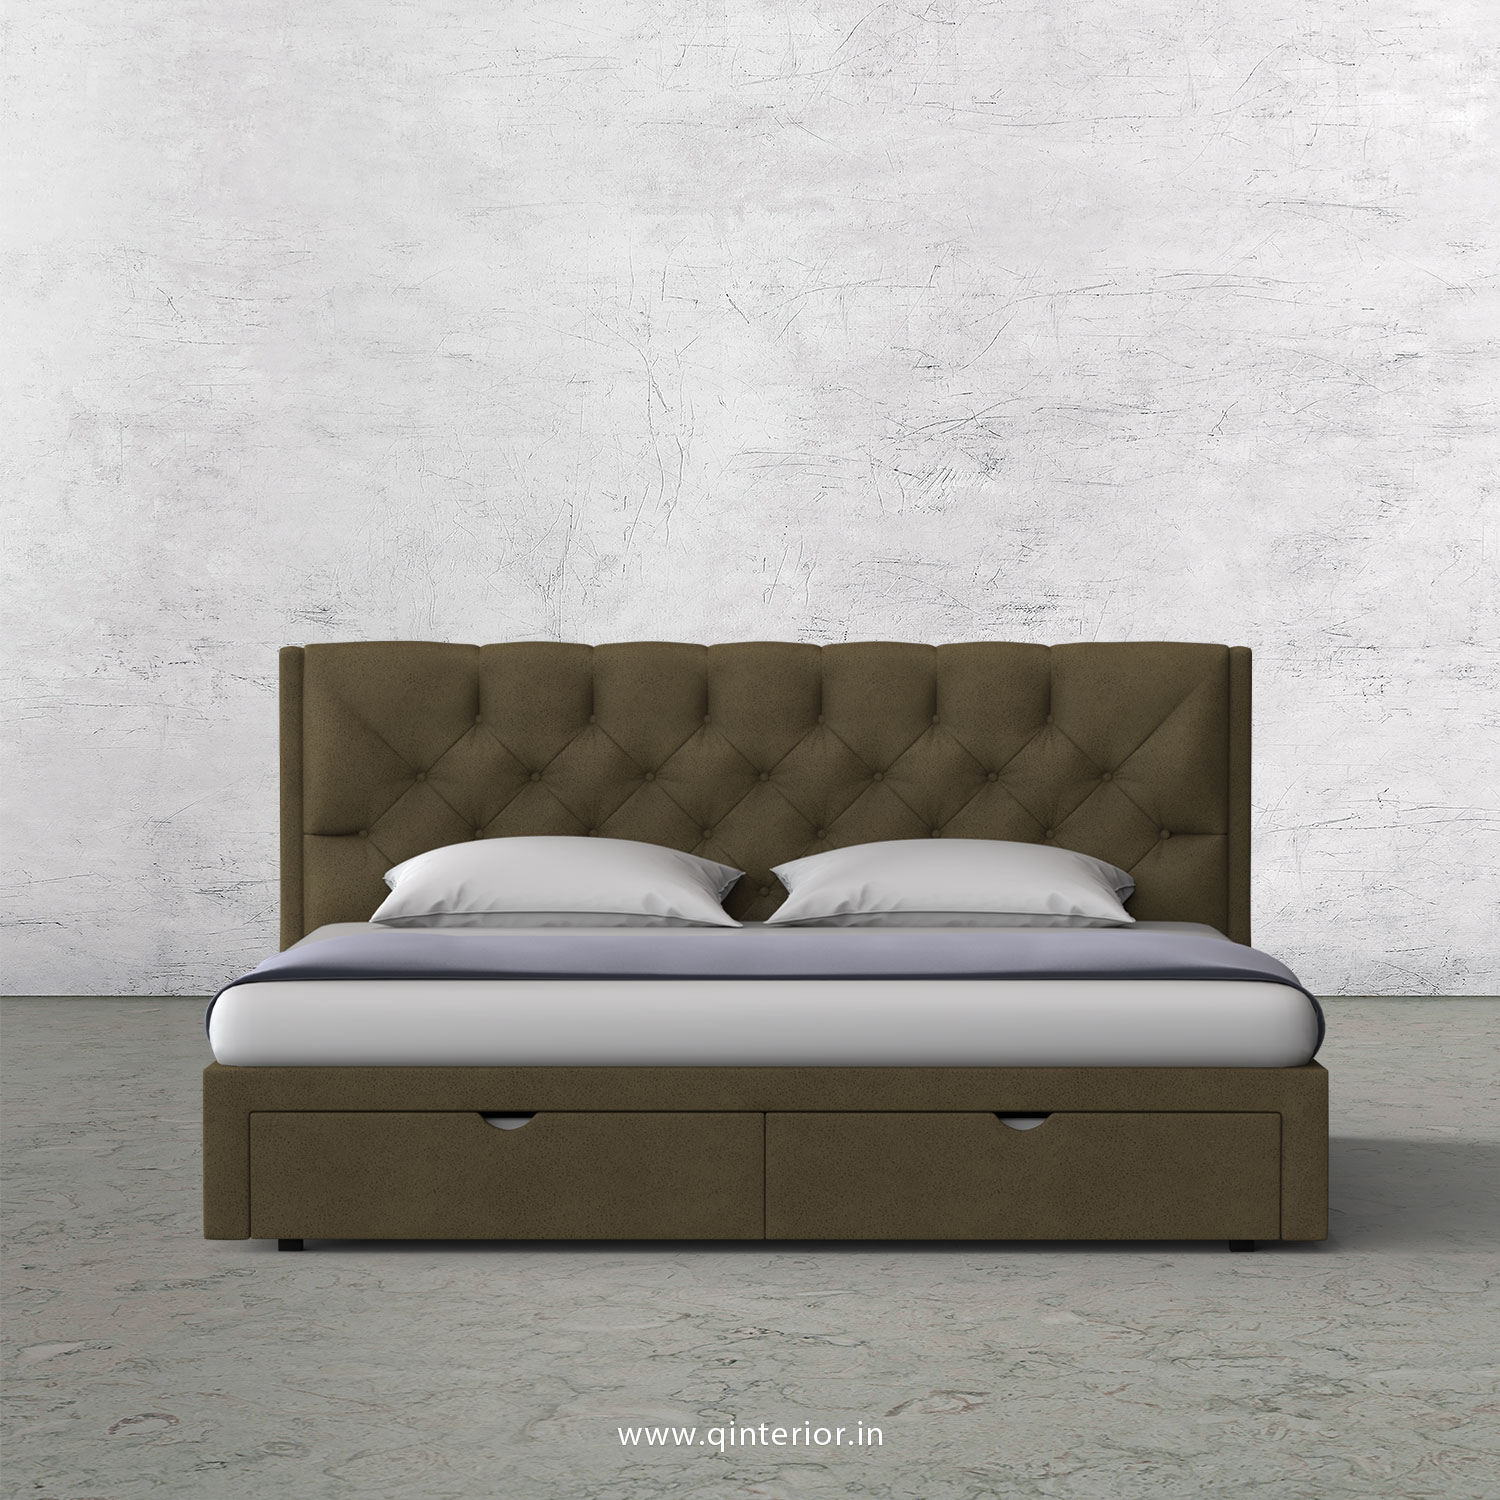 Scorpius King Size Storage Bed in Fab Leather Fabric - KBD001 FL01